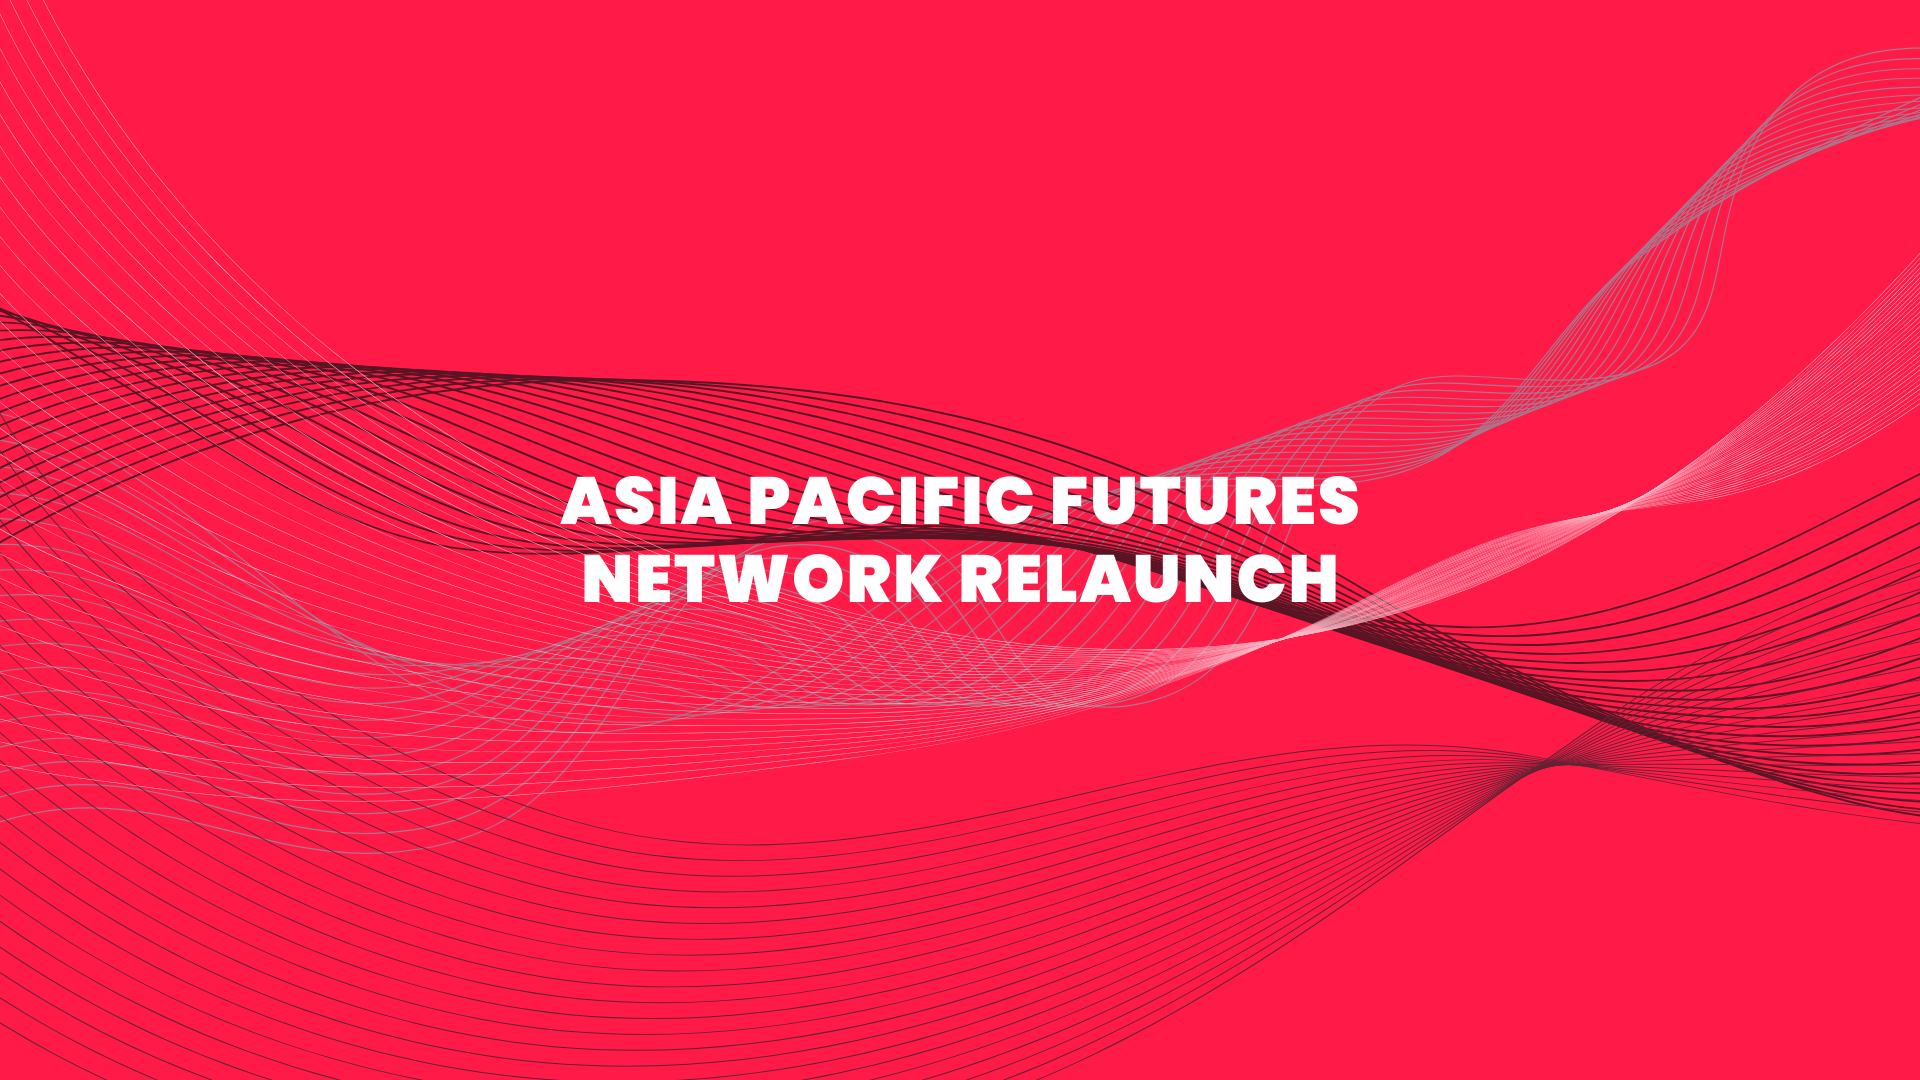 Asia Pacific Futures Network Relaunch